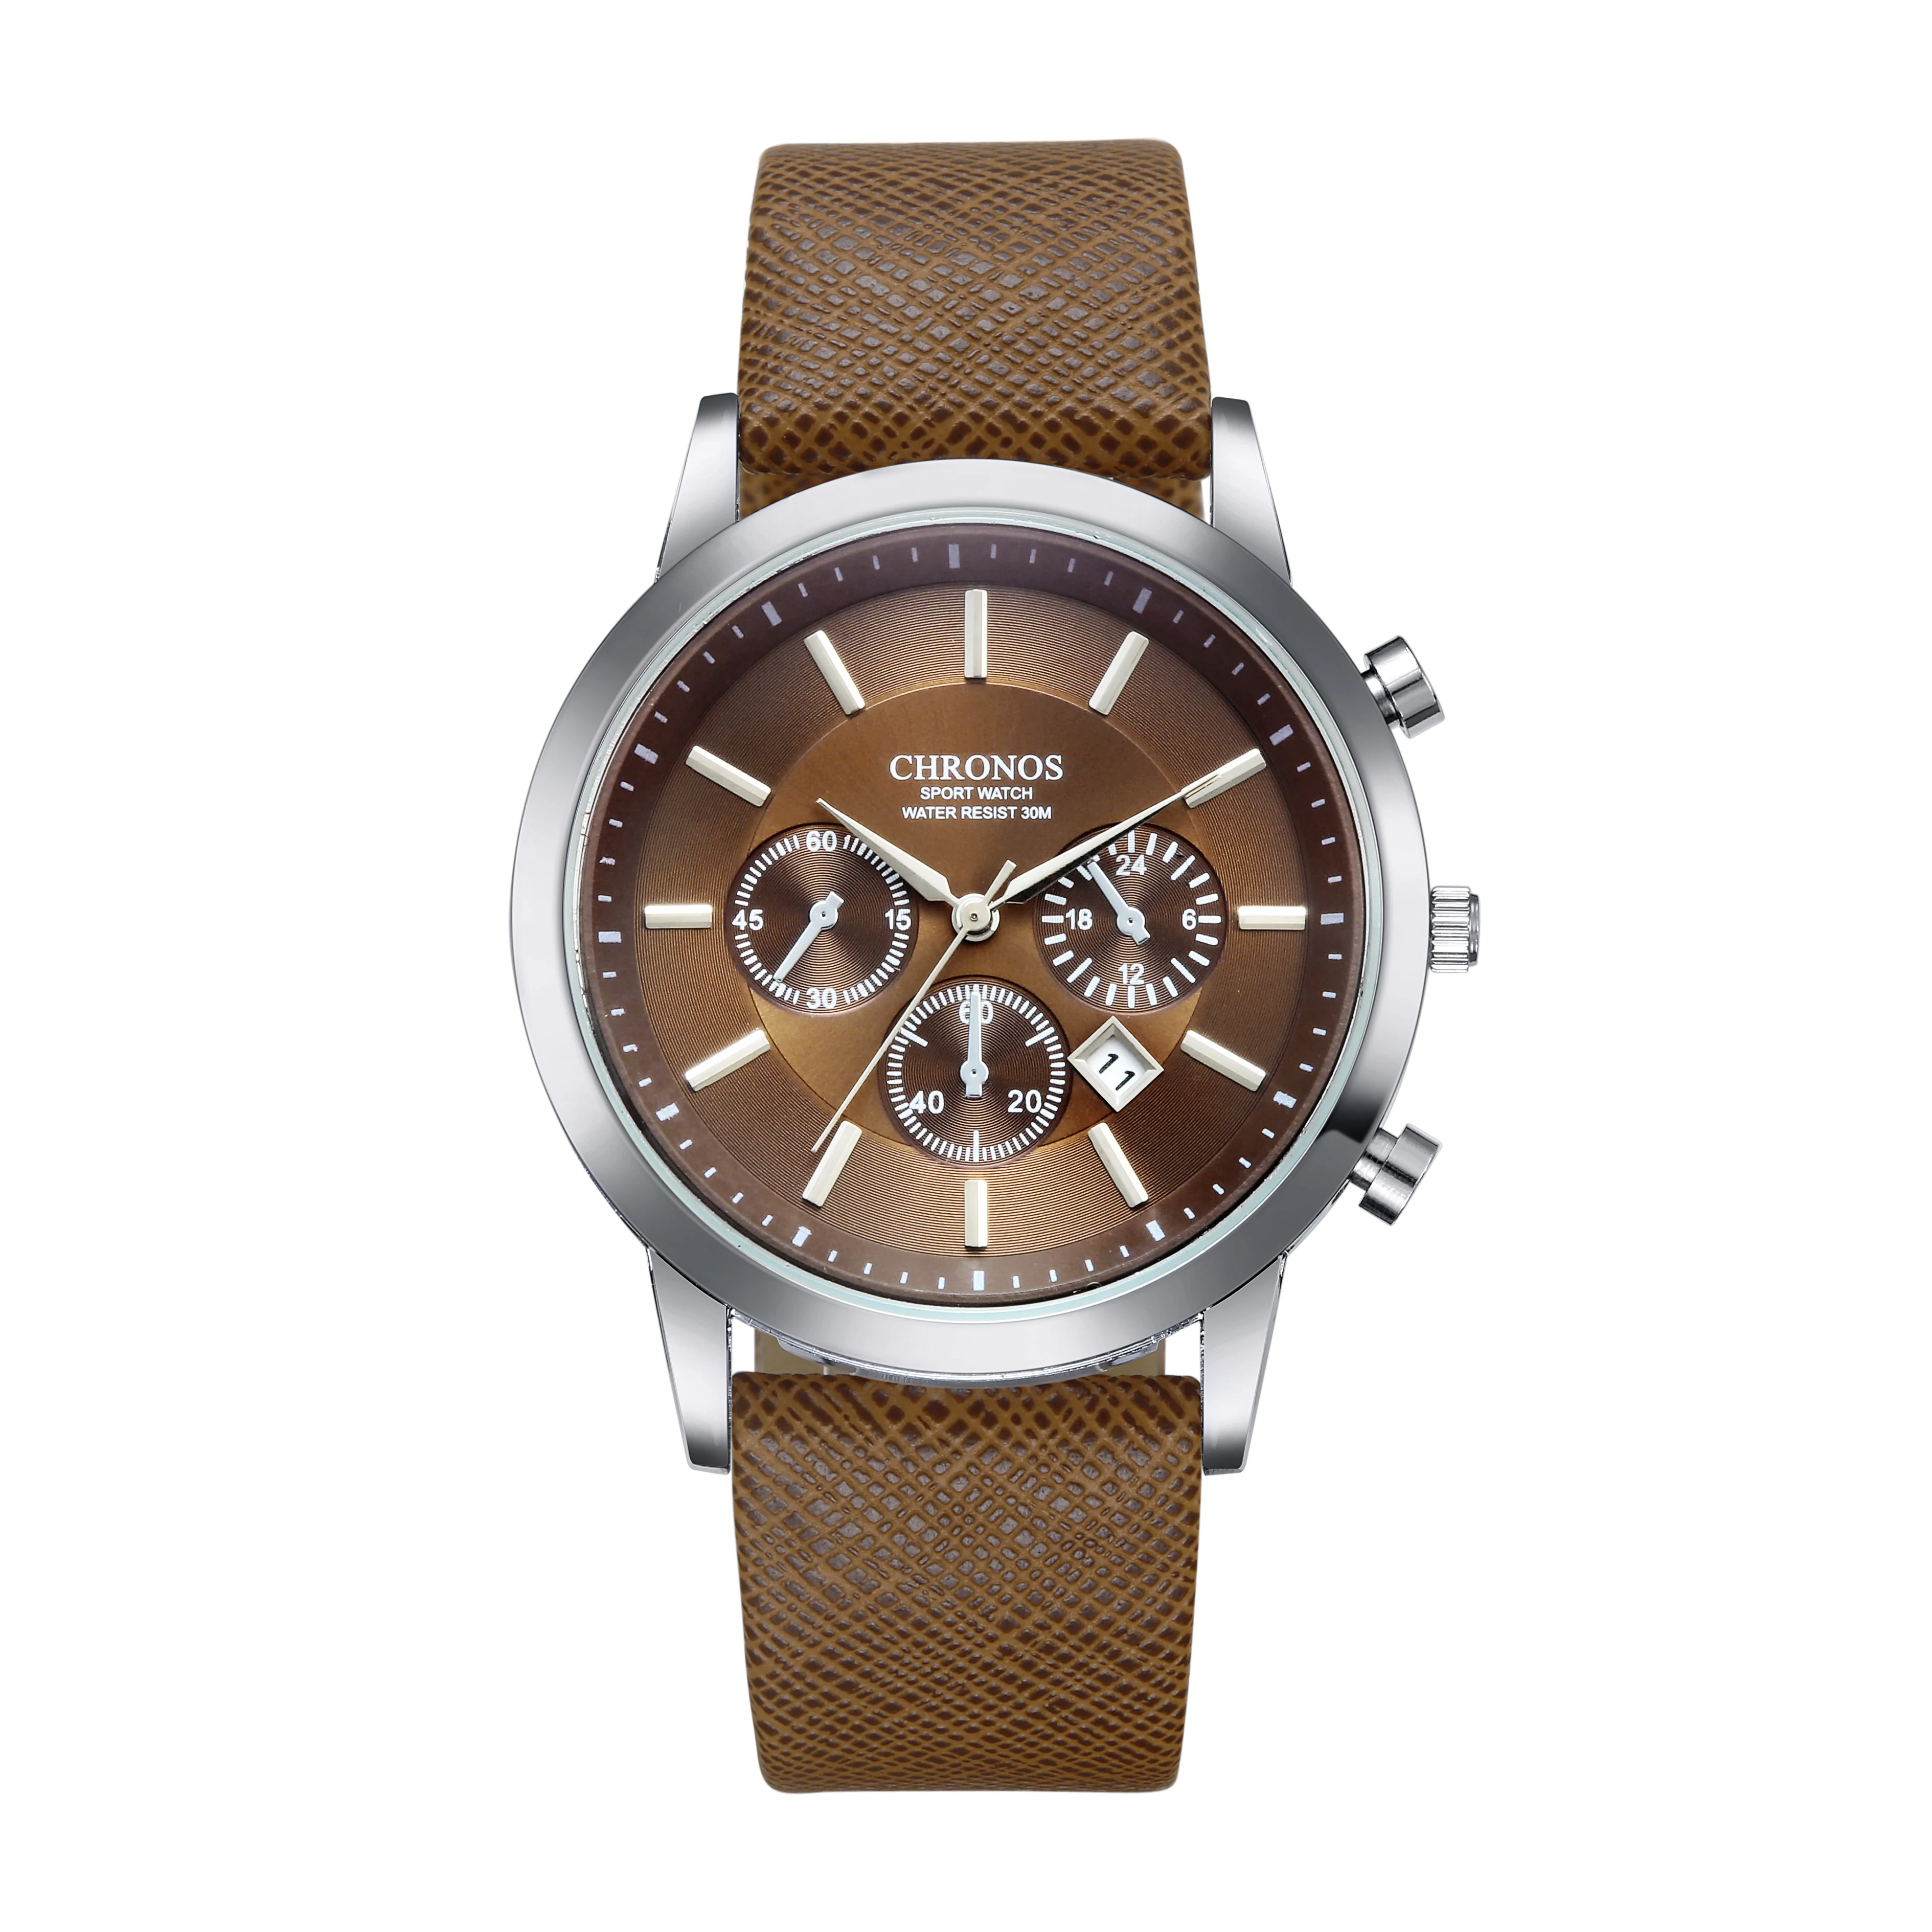 

New fashion casual quartz watch men large dial waterproof chronograph leather wrist watch reloj hombre, Sliver or custom